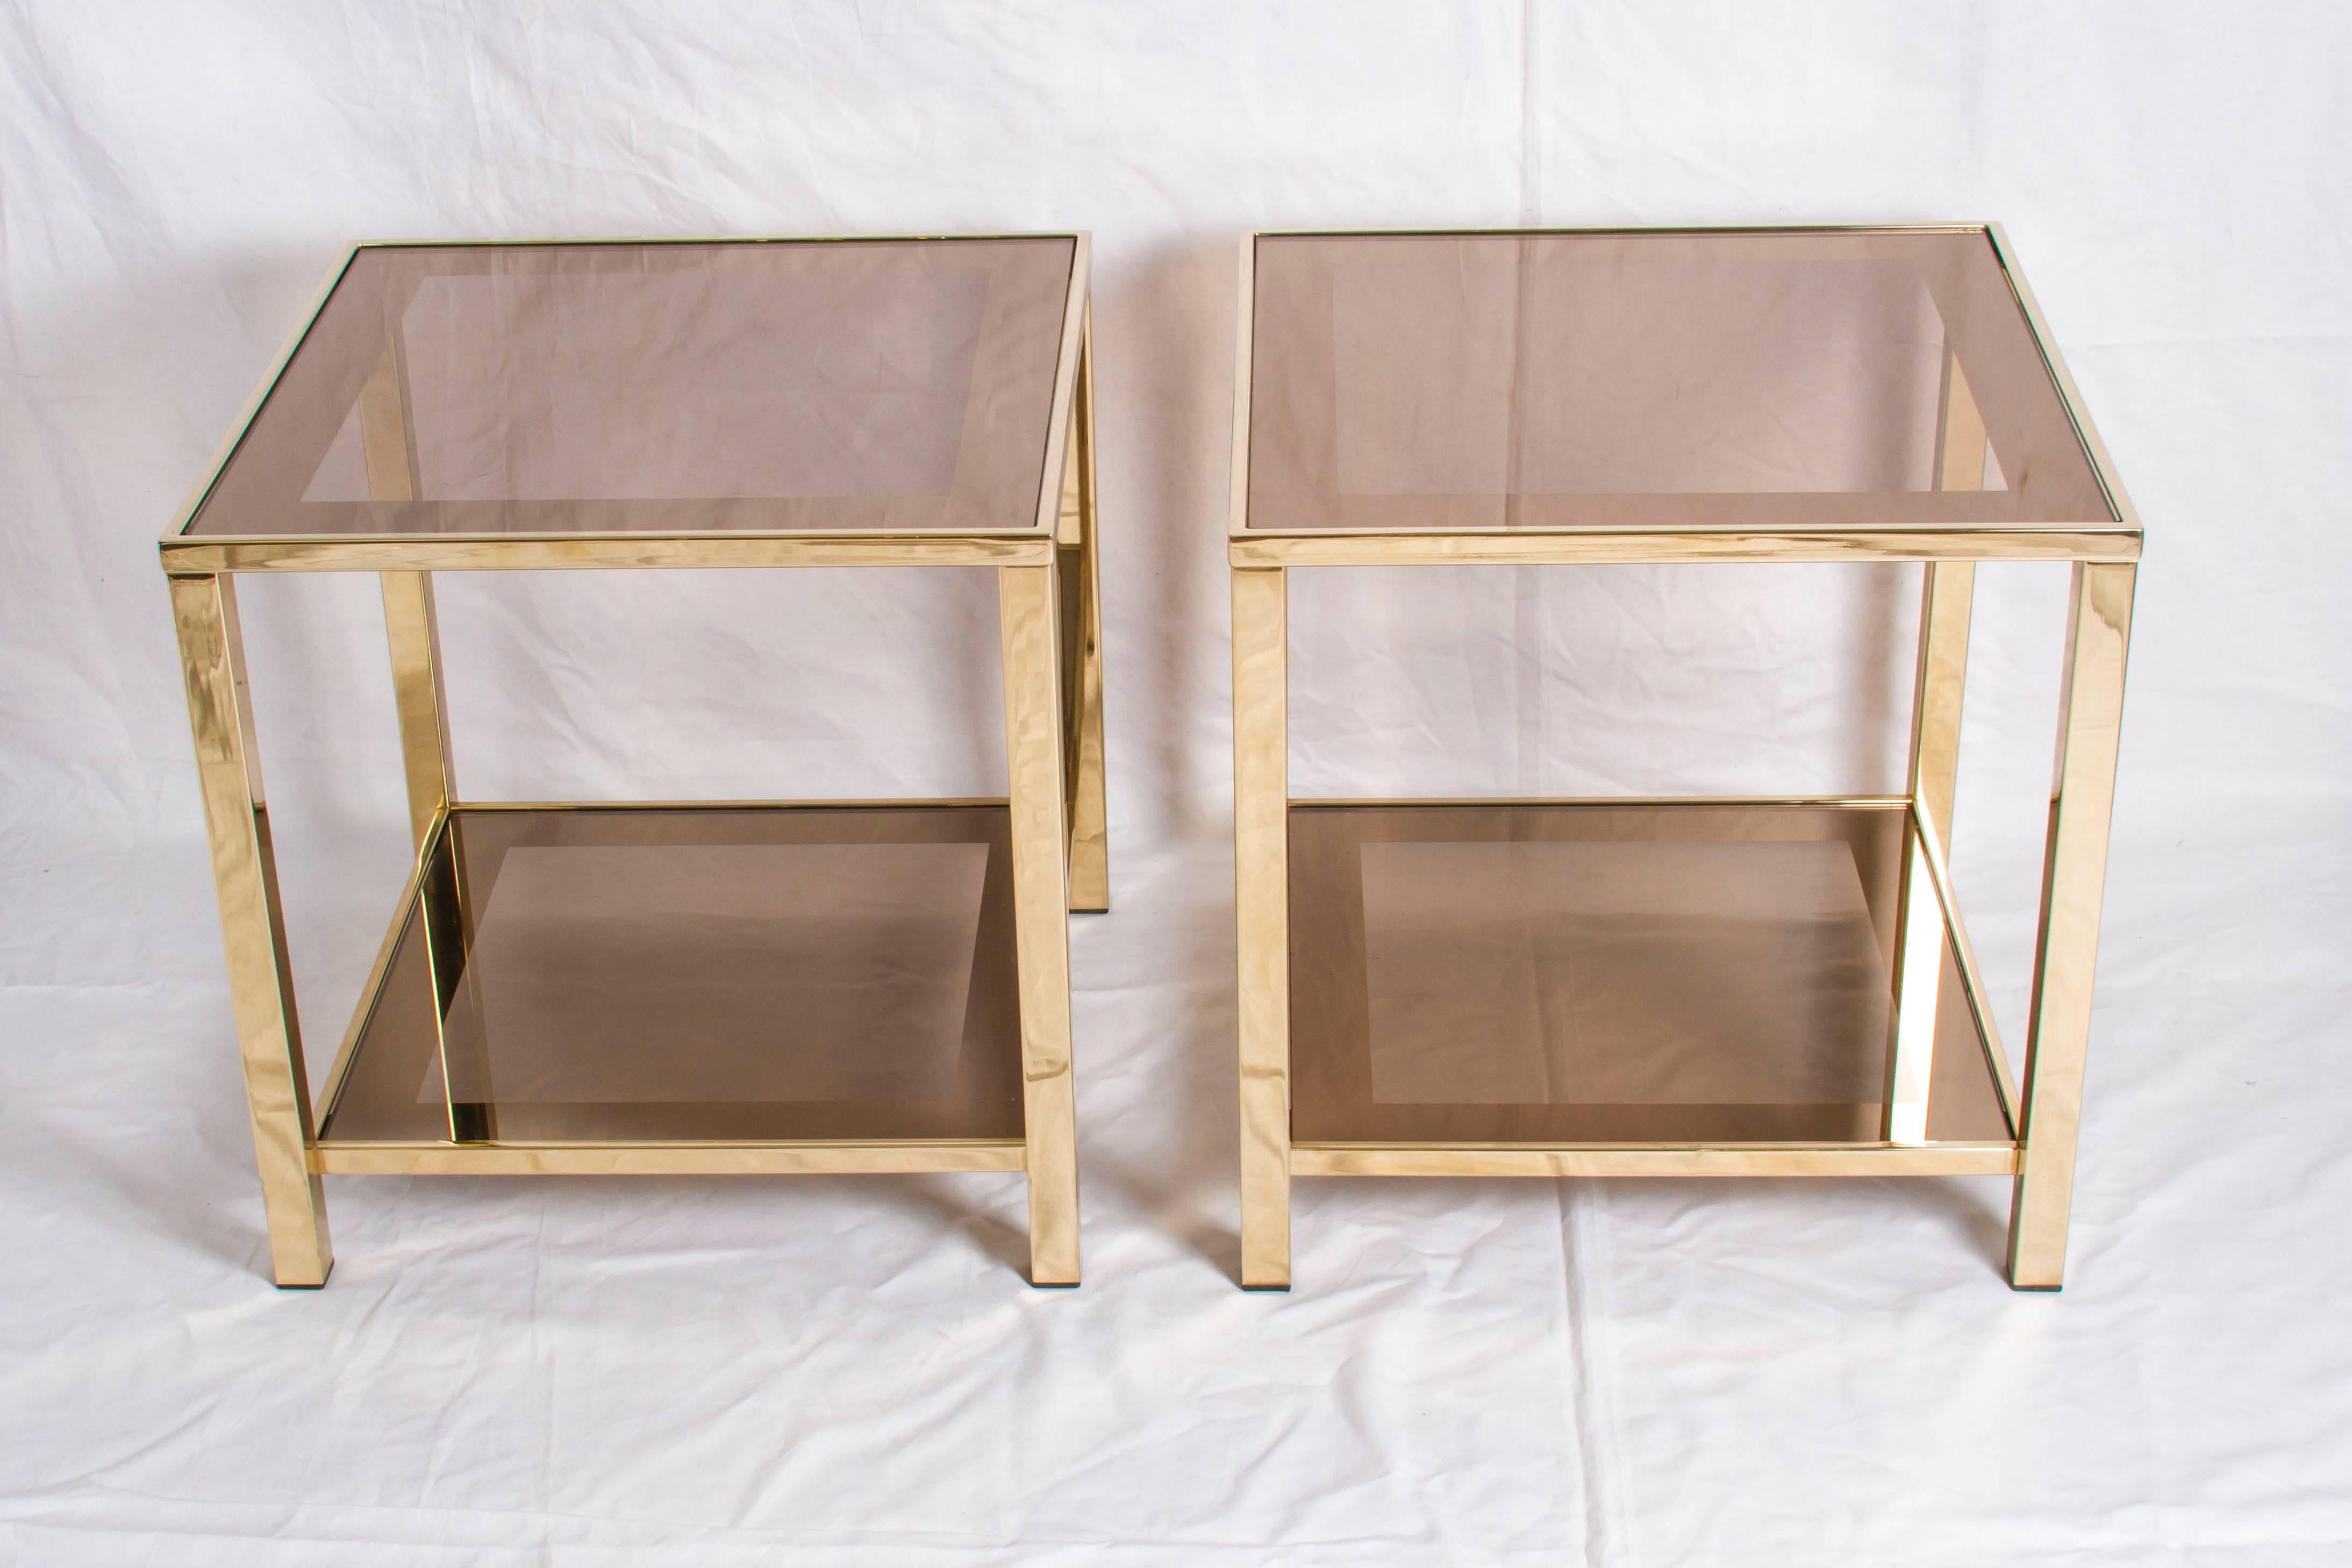 Amazing and rare 23-carat gold-plated set of two side tables with copper mirror tops by Belgo Chrome.

Please contact us for delivery details.